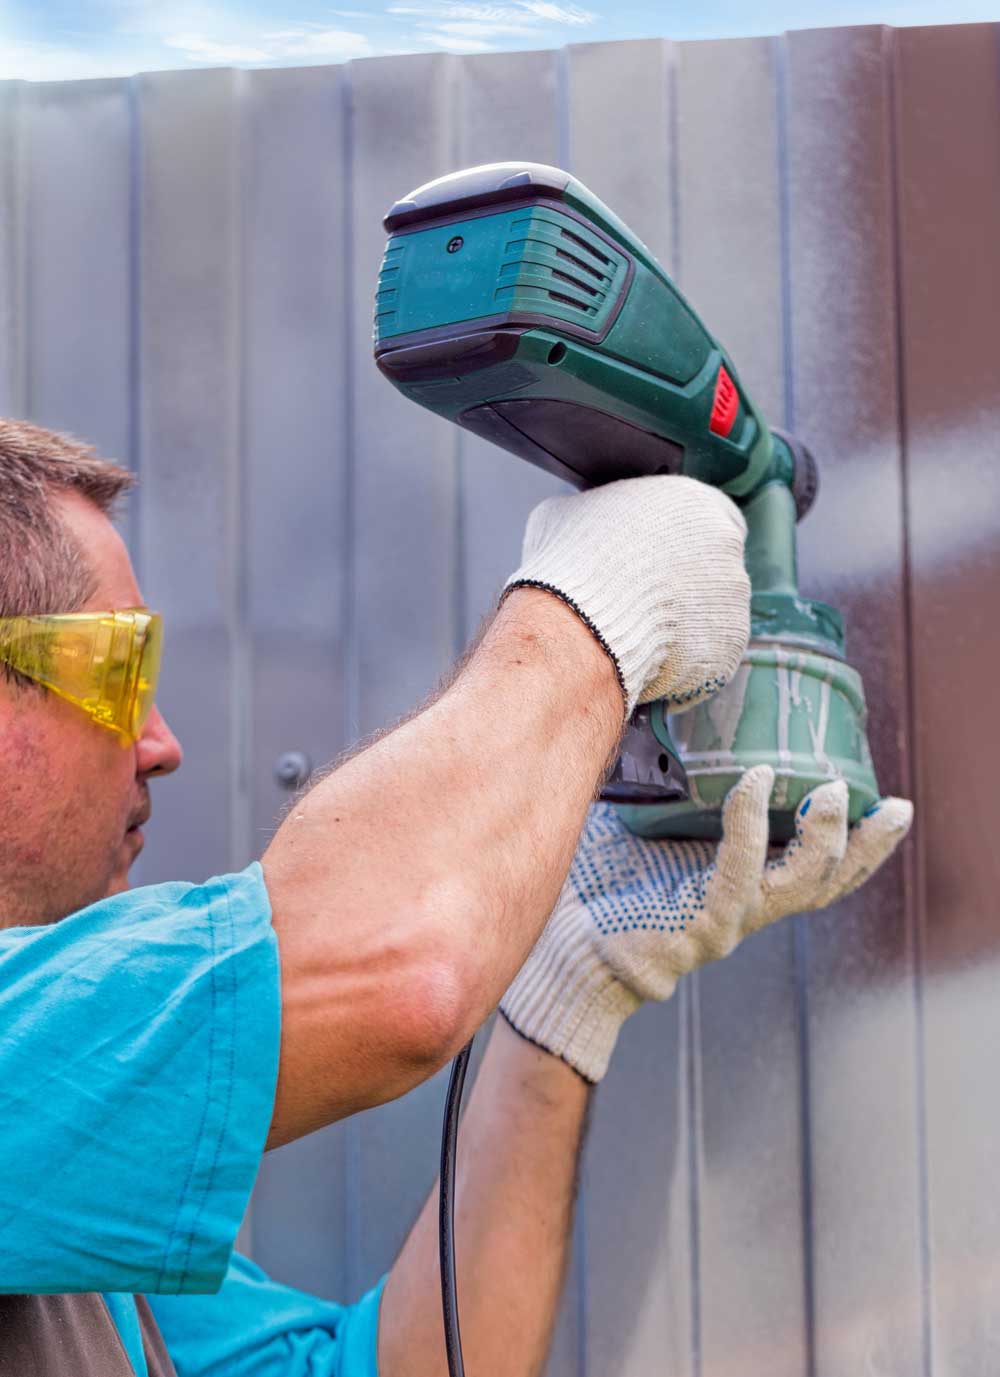 Painter applying stain to a fence using a paint sprayer